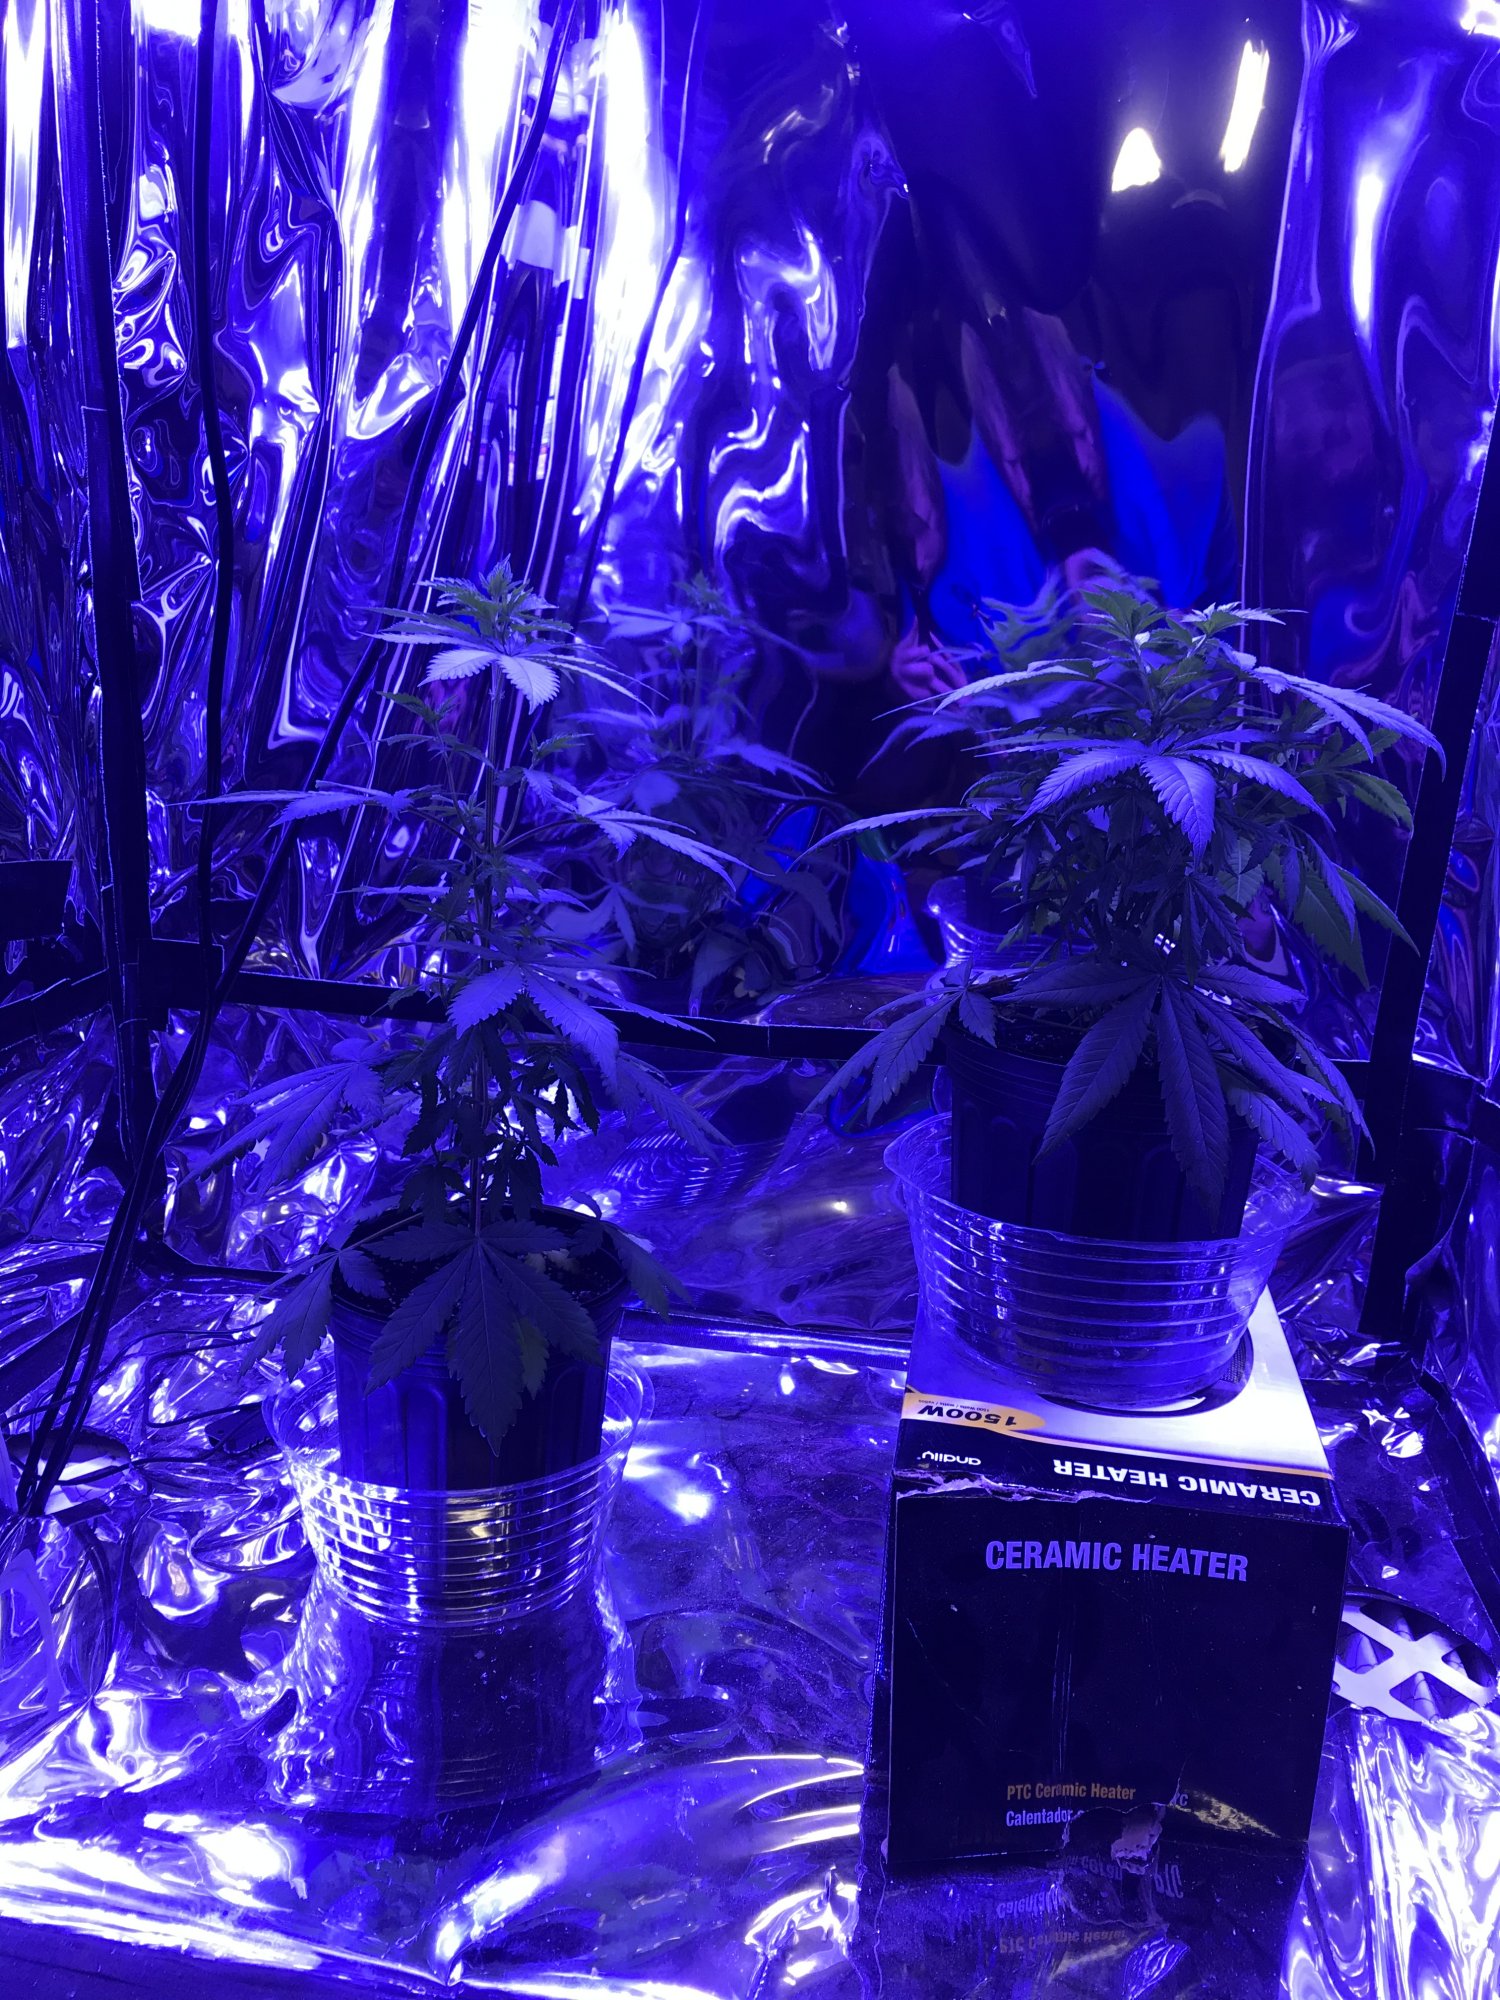 New here and a beginner grower 3